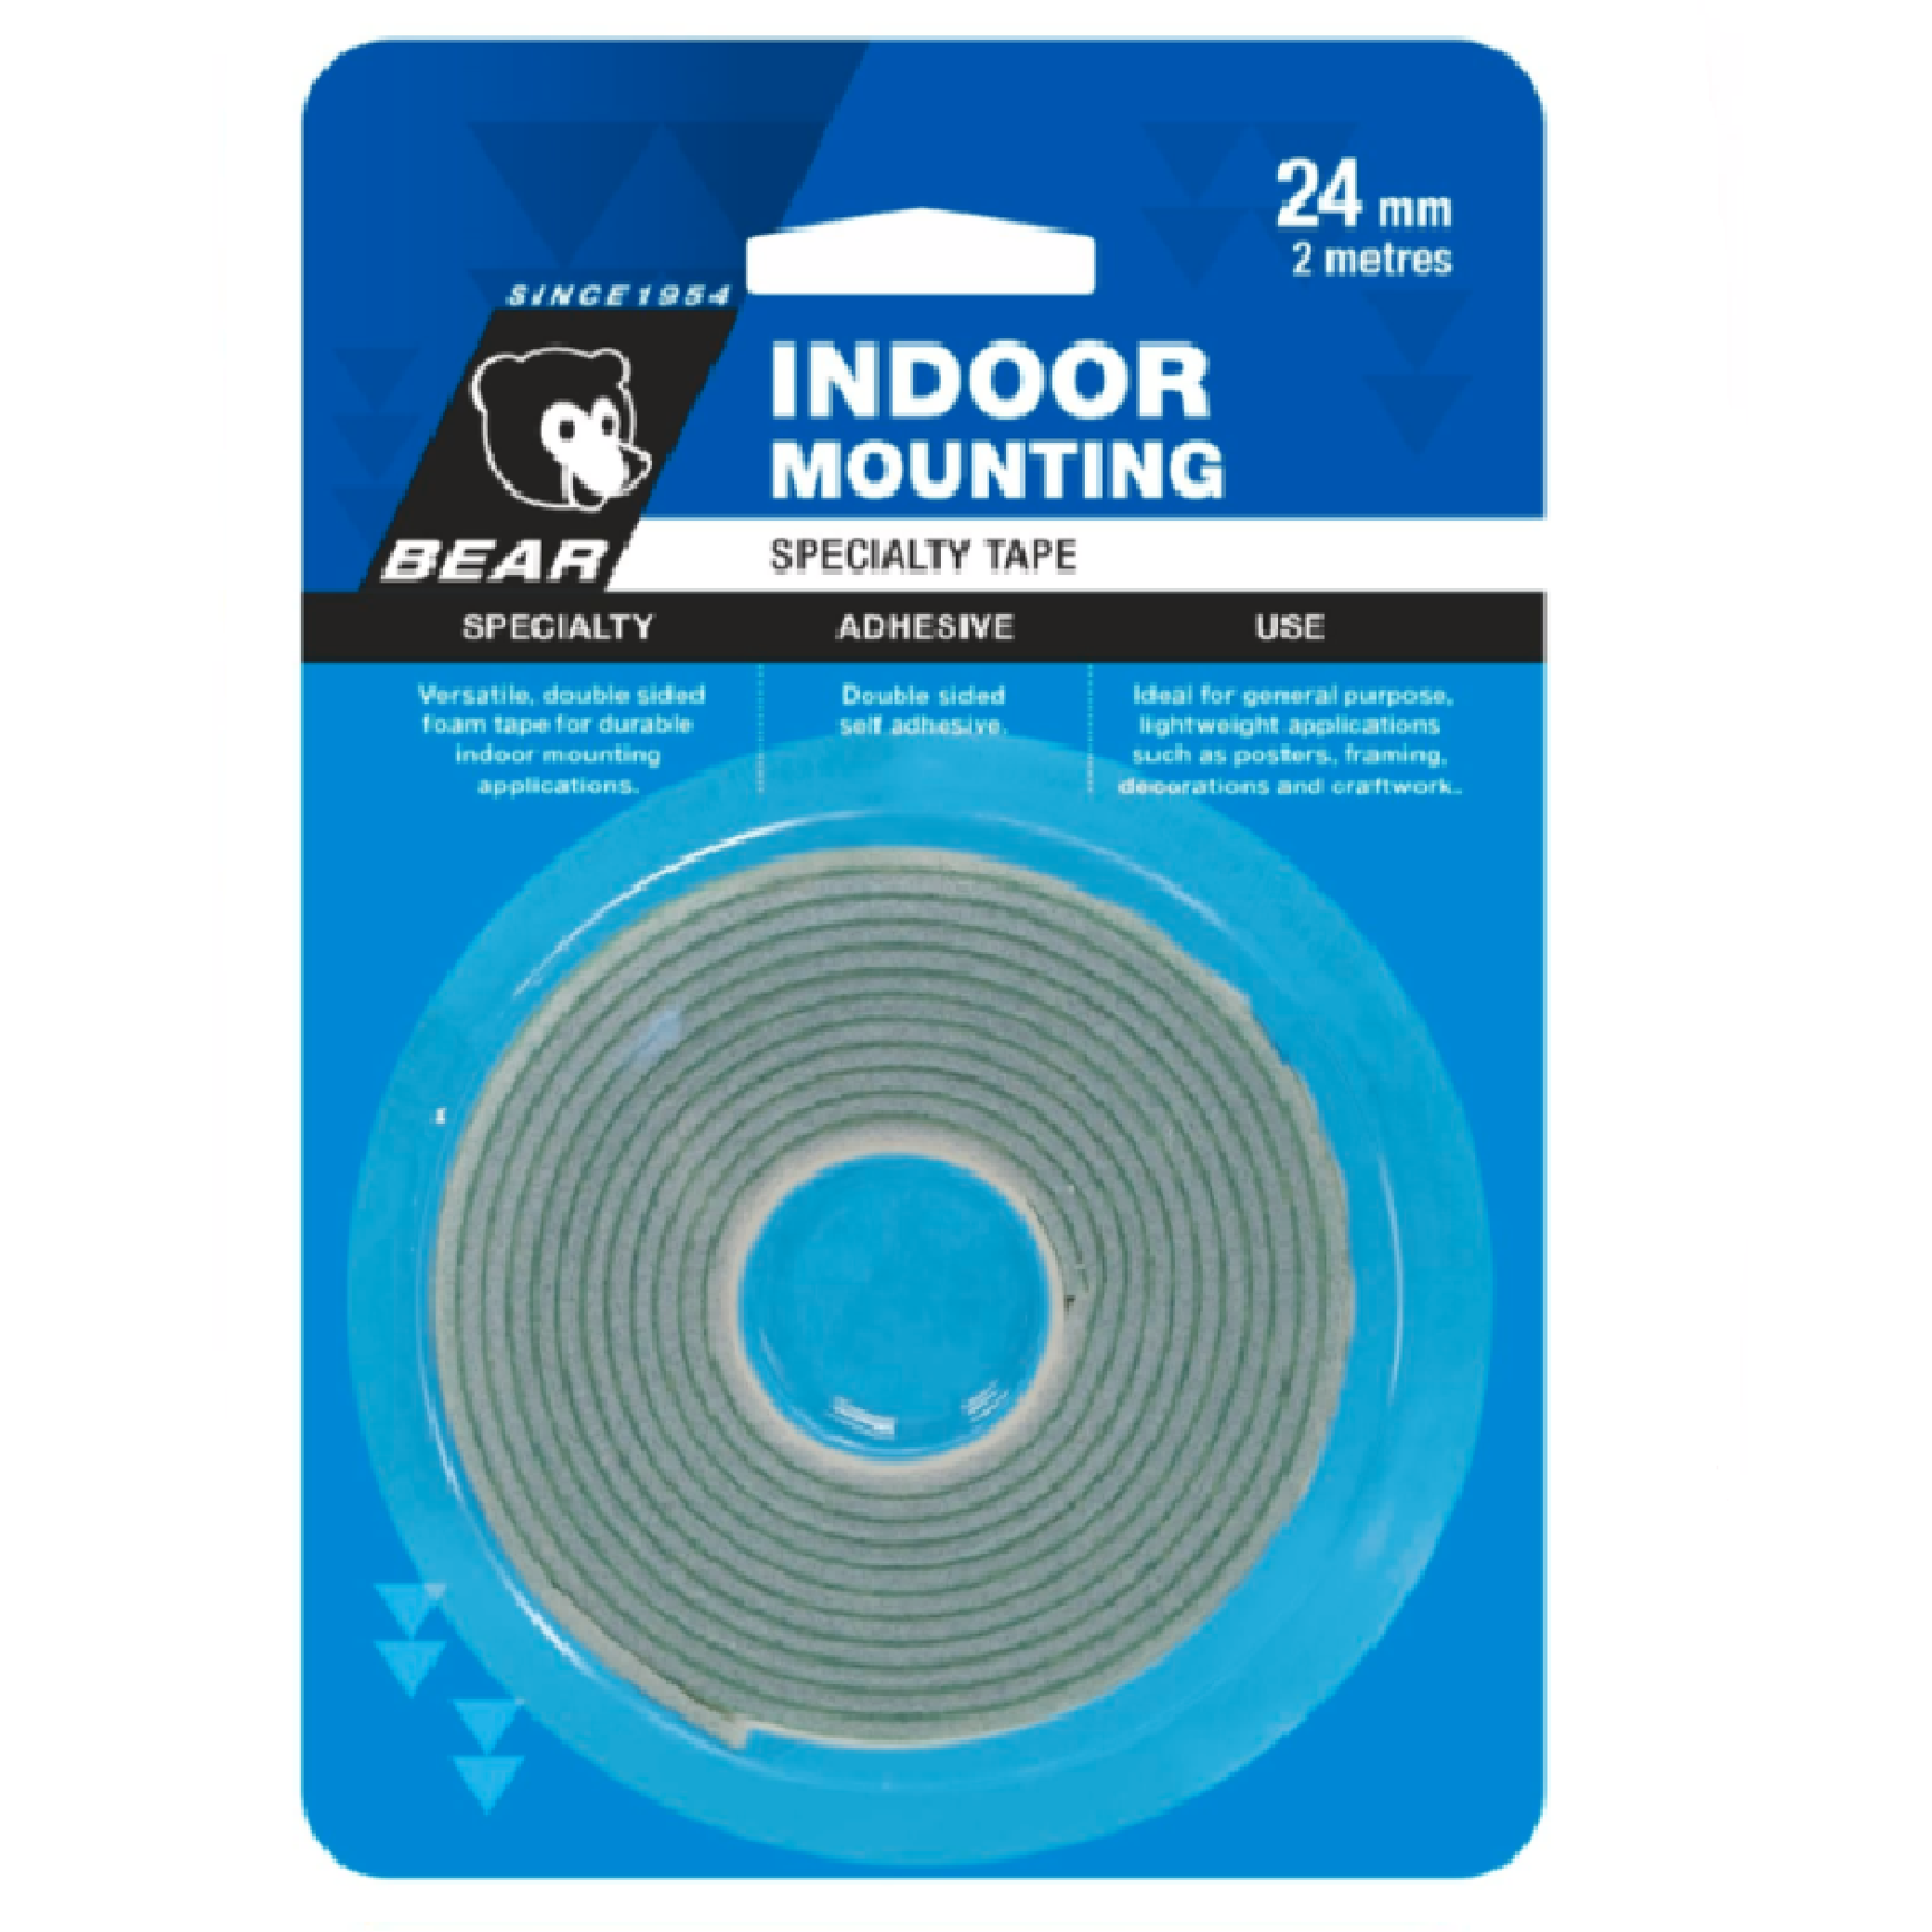 BEAR INDOOR Mounting Double Sided Tape HEAVY DUTY 24MM X 2M